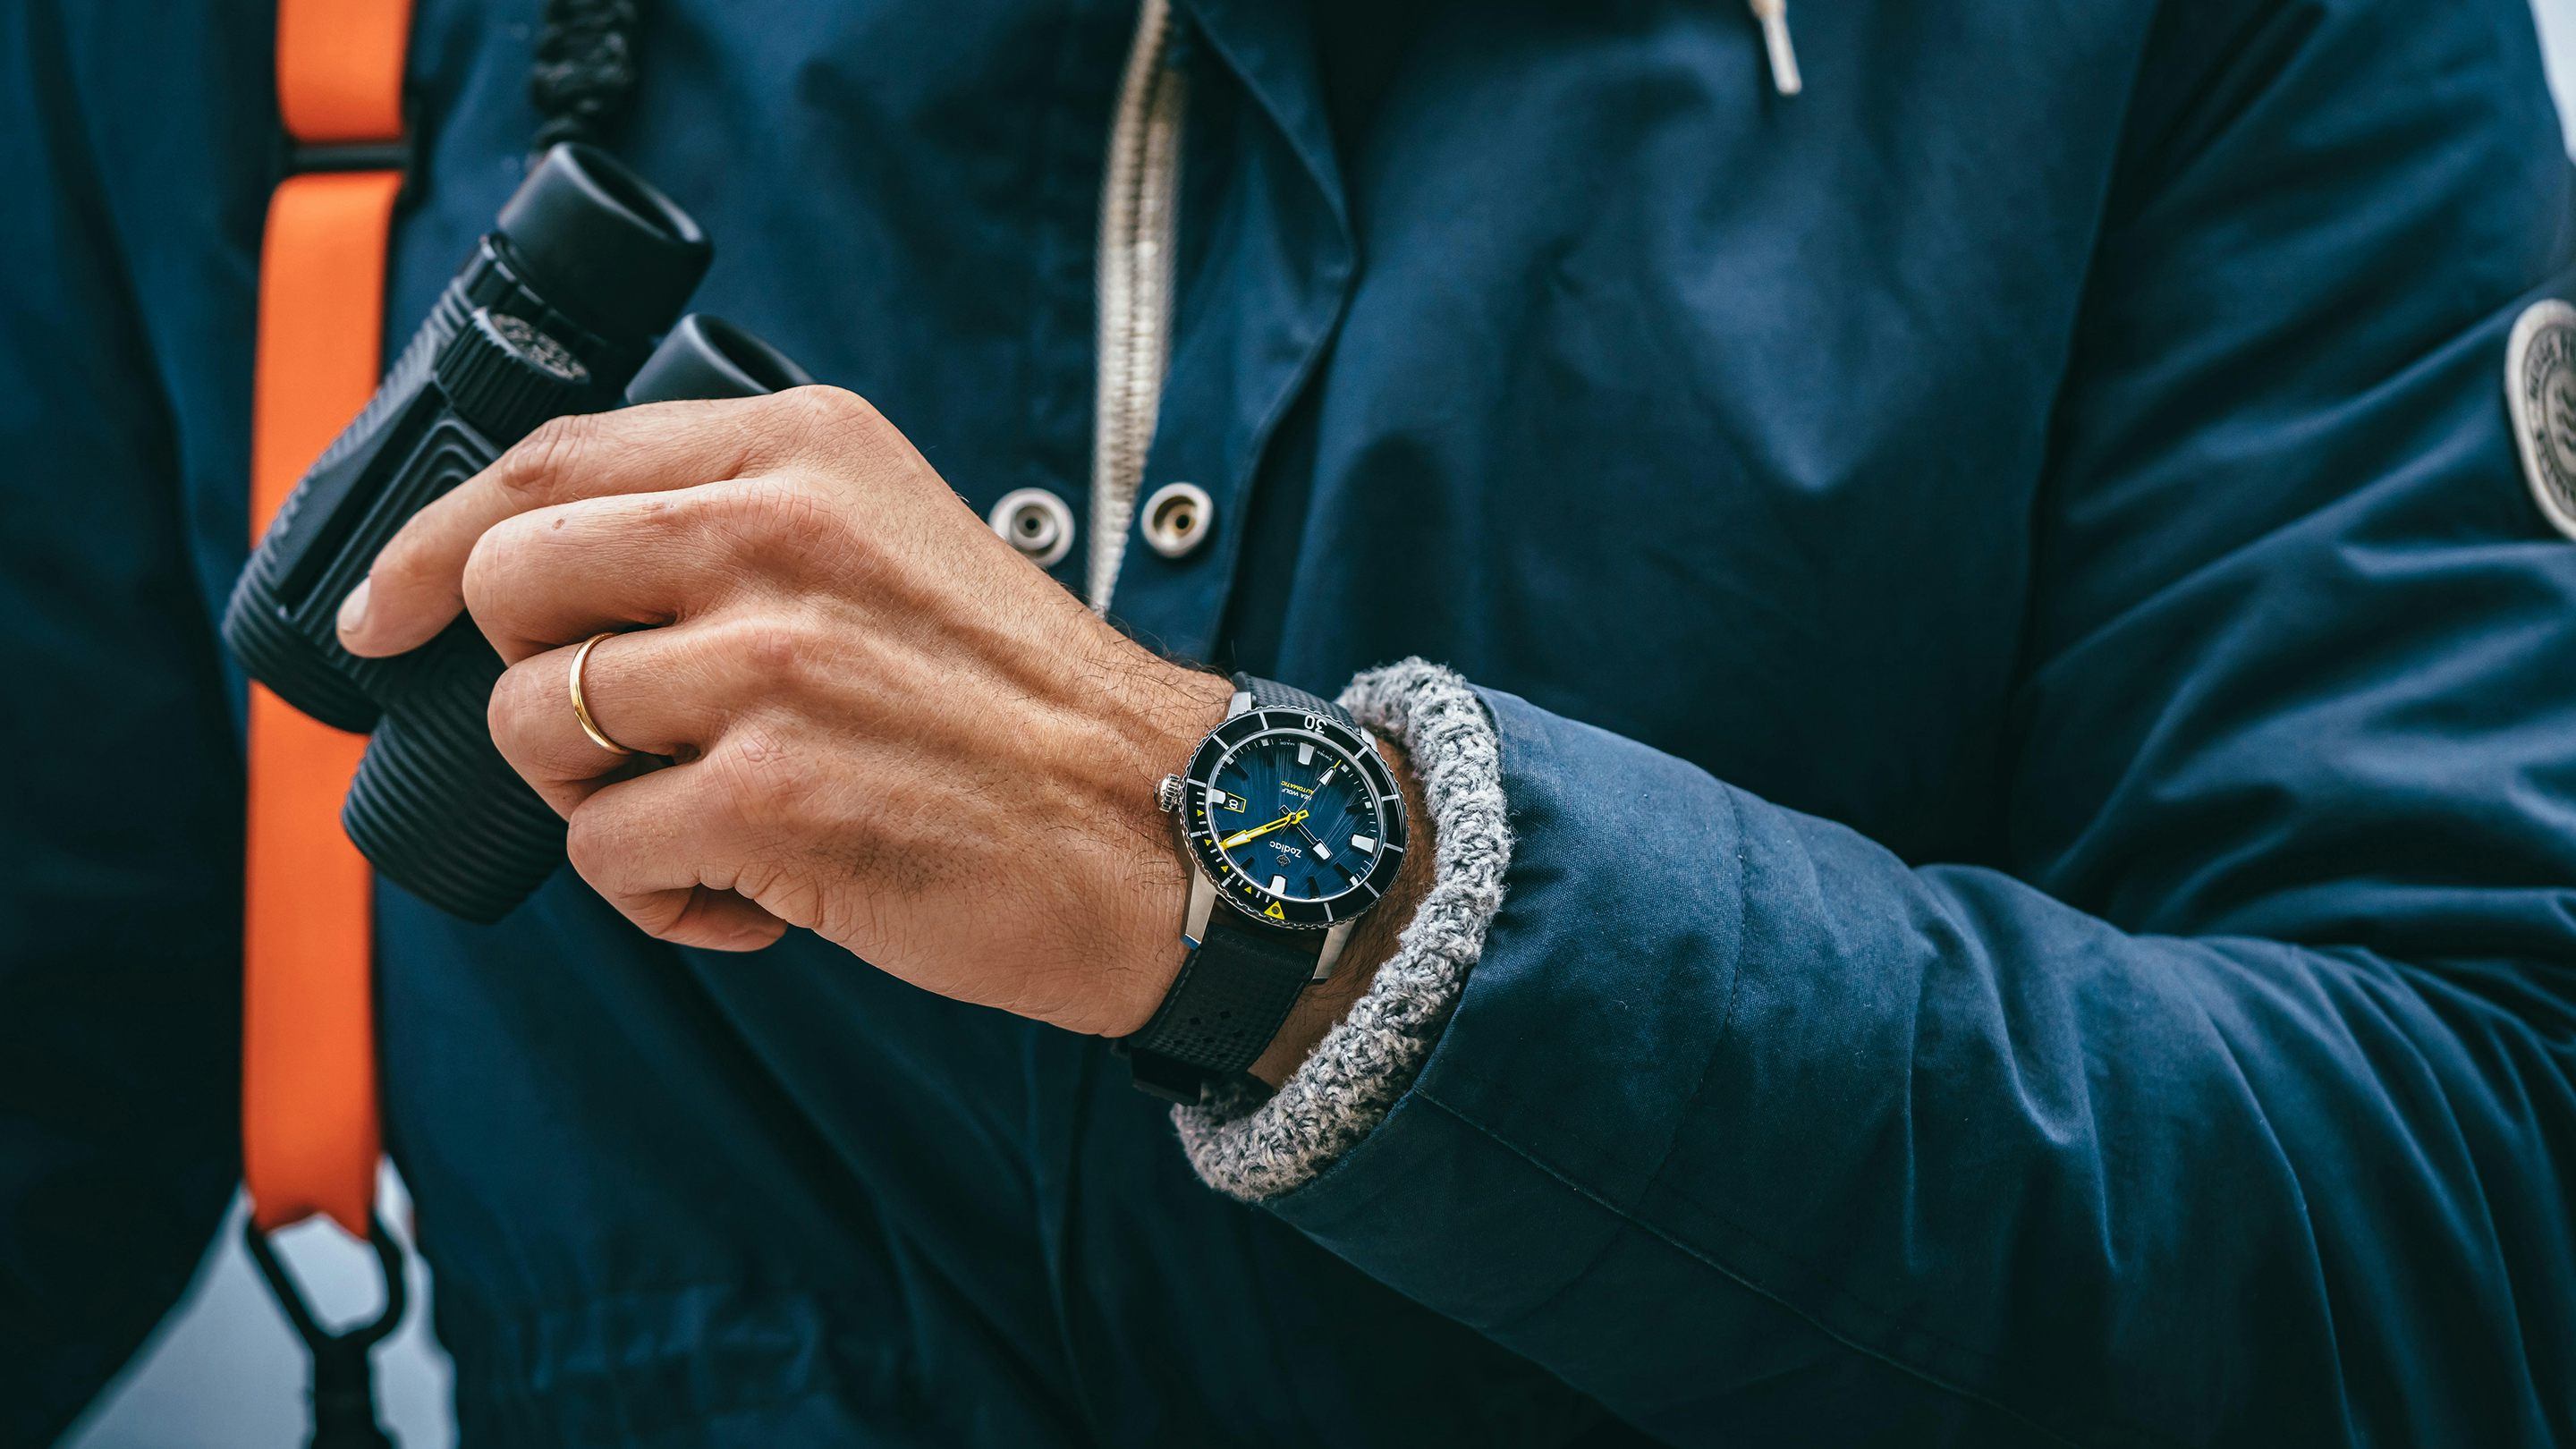 Watch with Sailing Strap: The Perfect Accessory for Your Ocean Adventures.